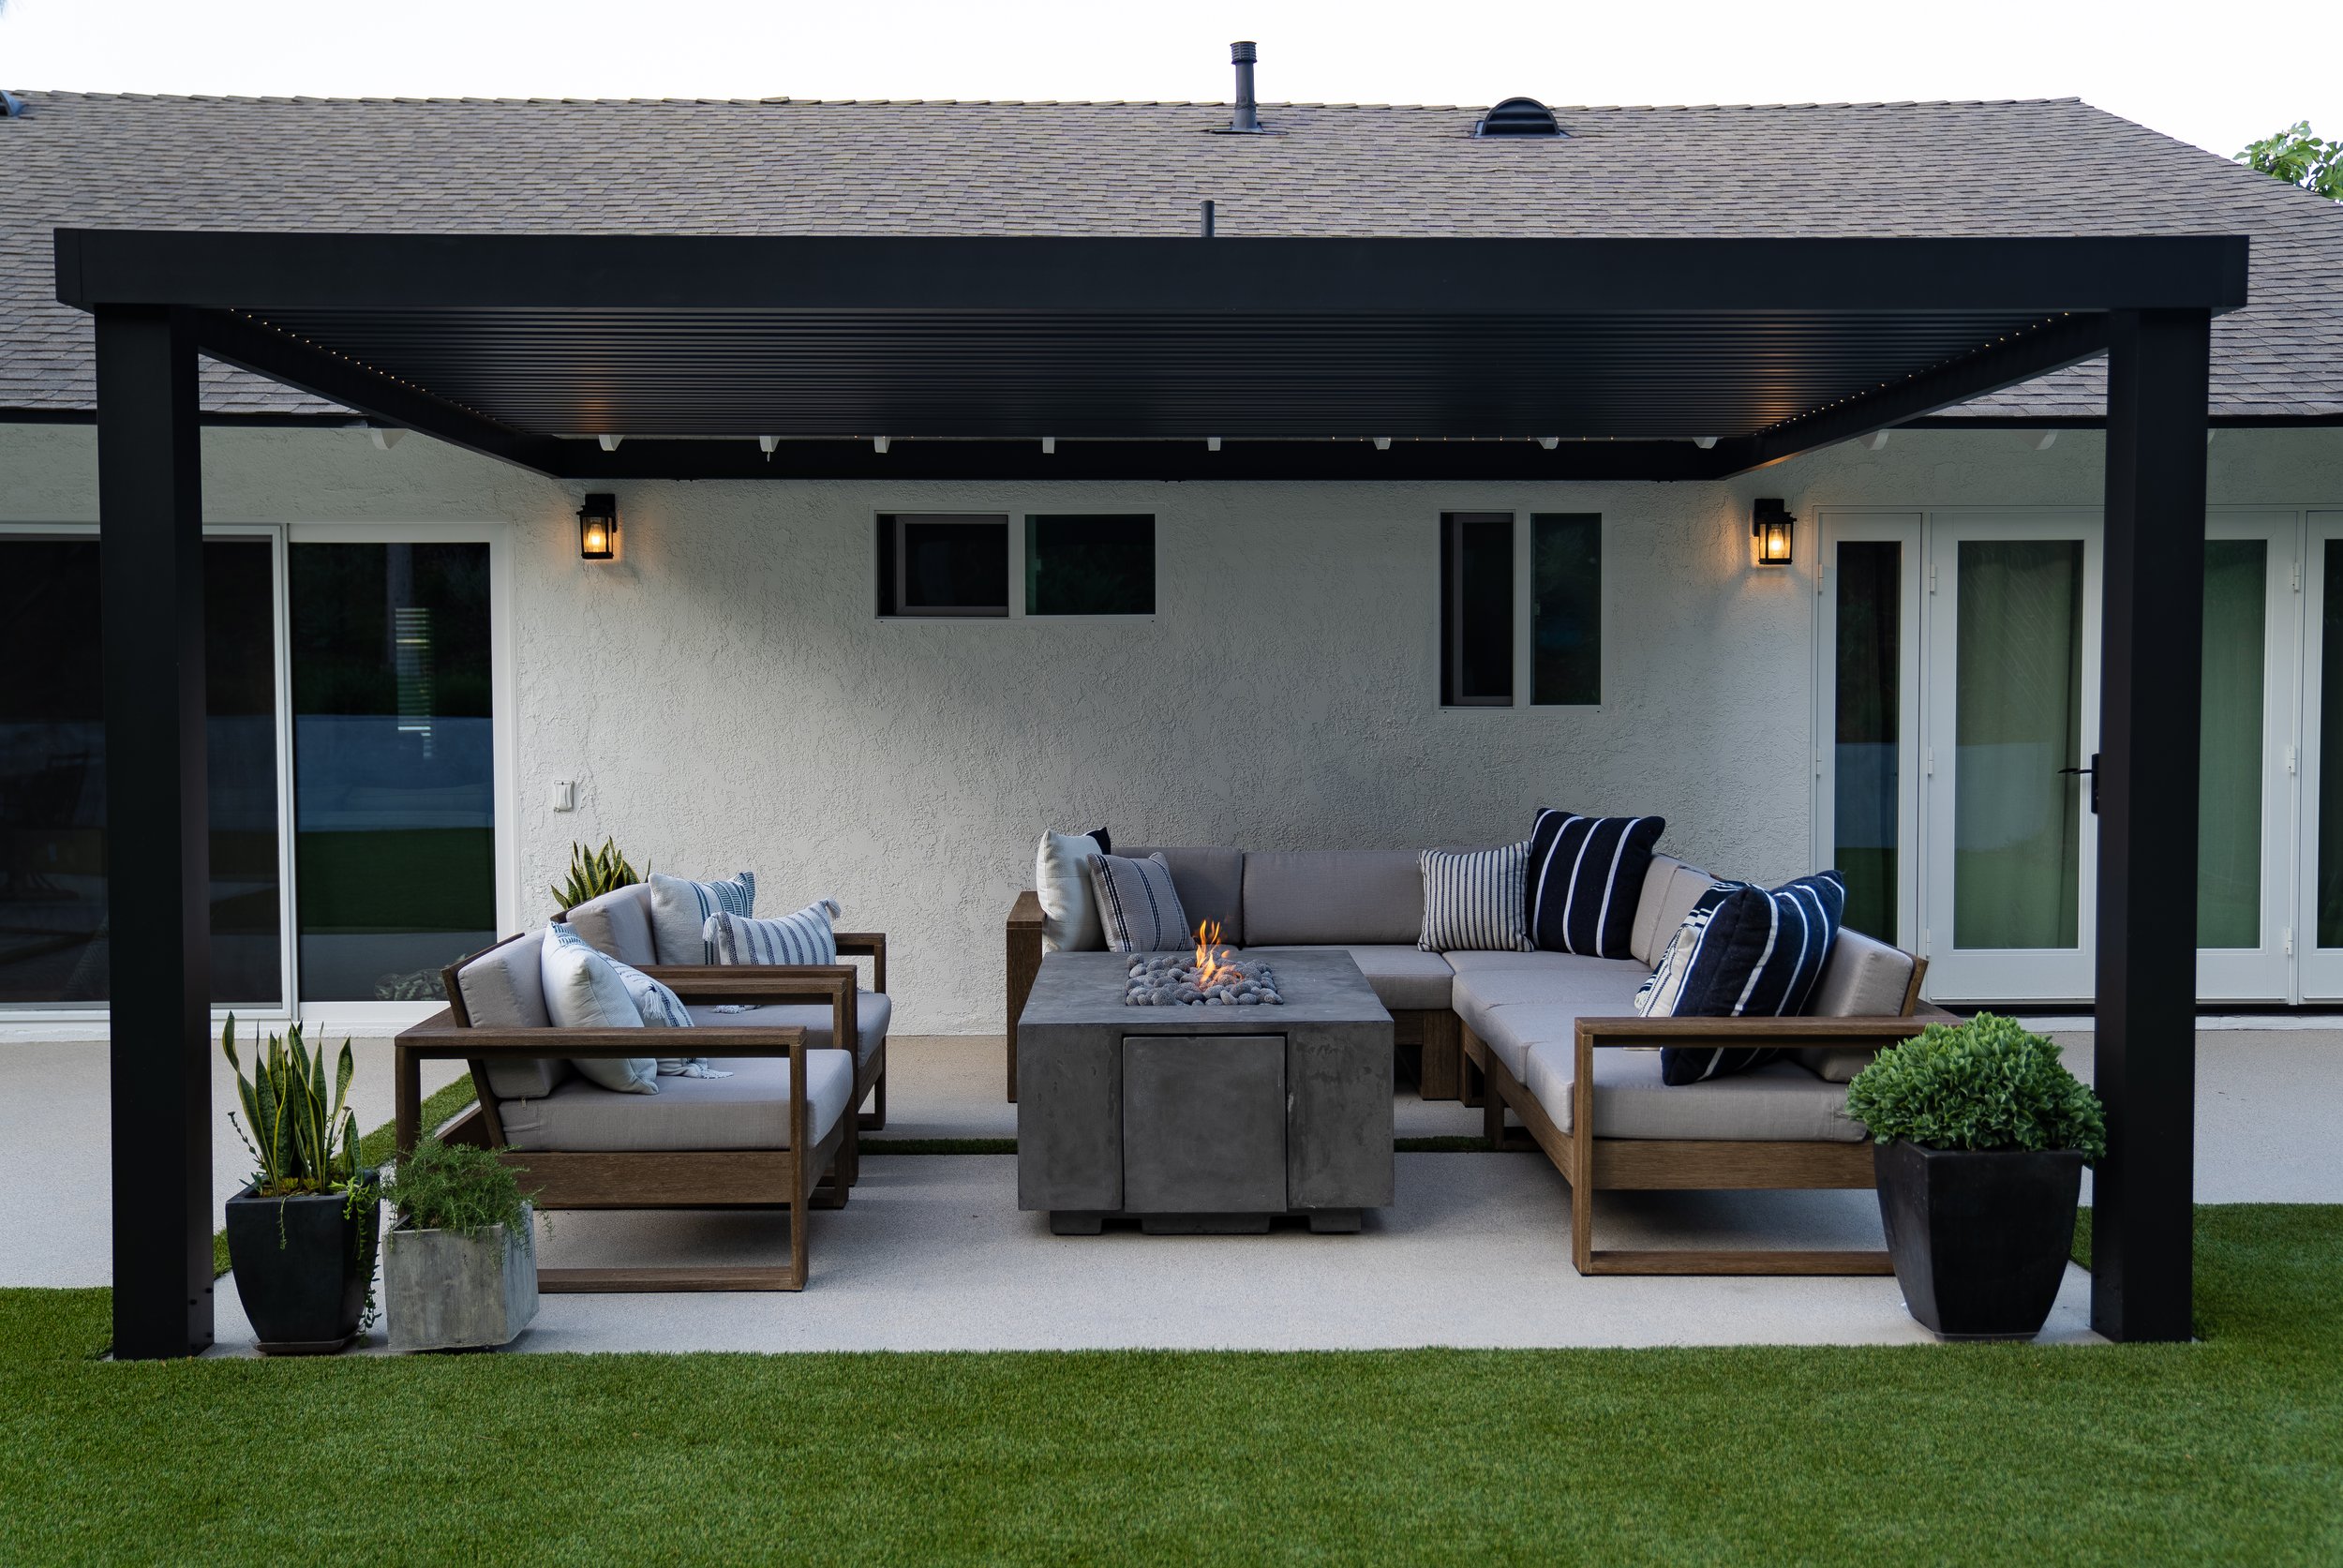 black pergola attached to back of home over a fire pit seating area with sectional and two lounge chairs